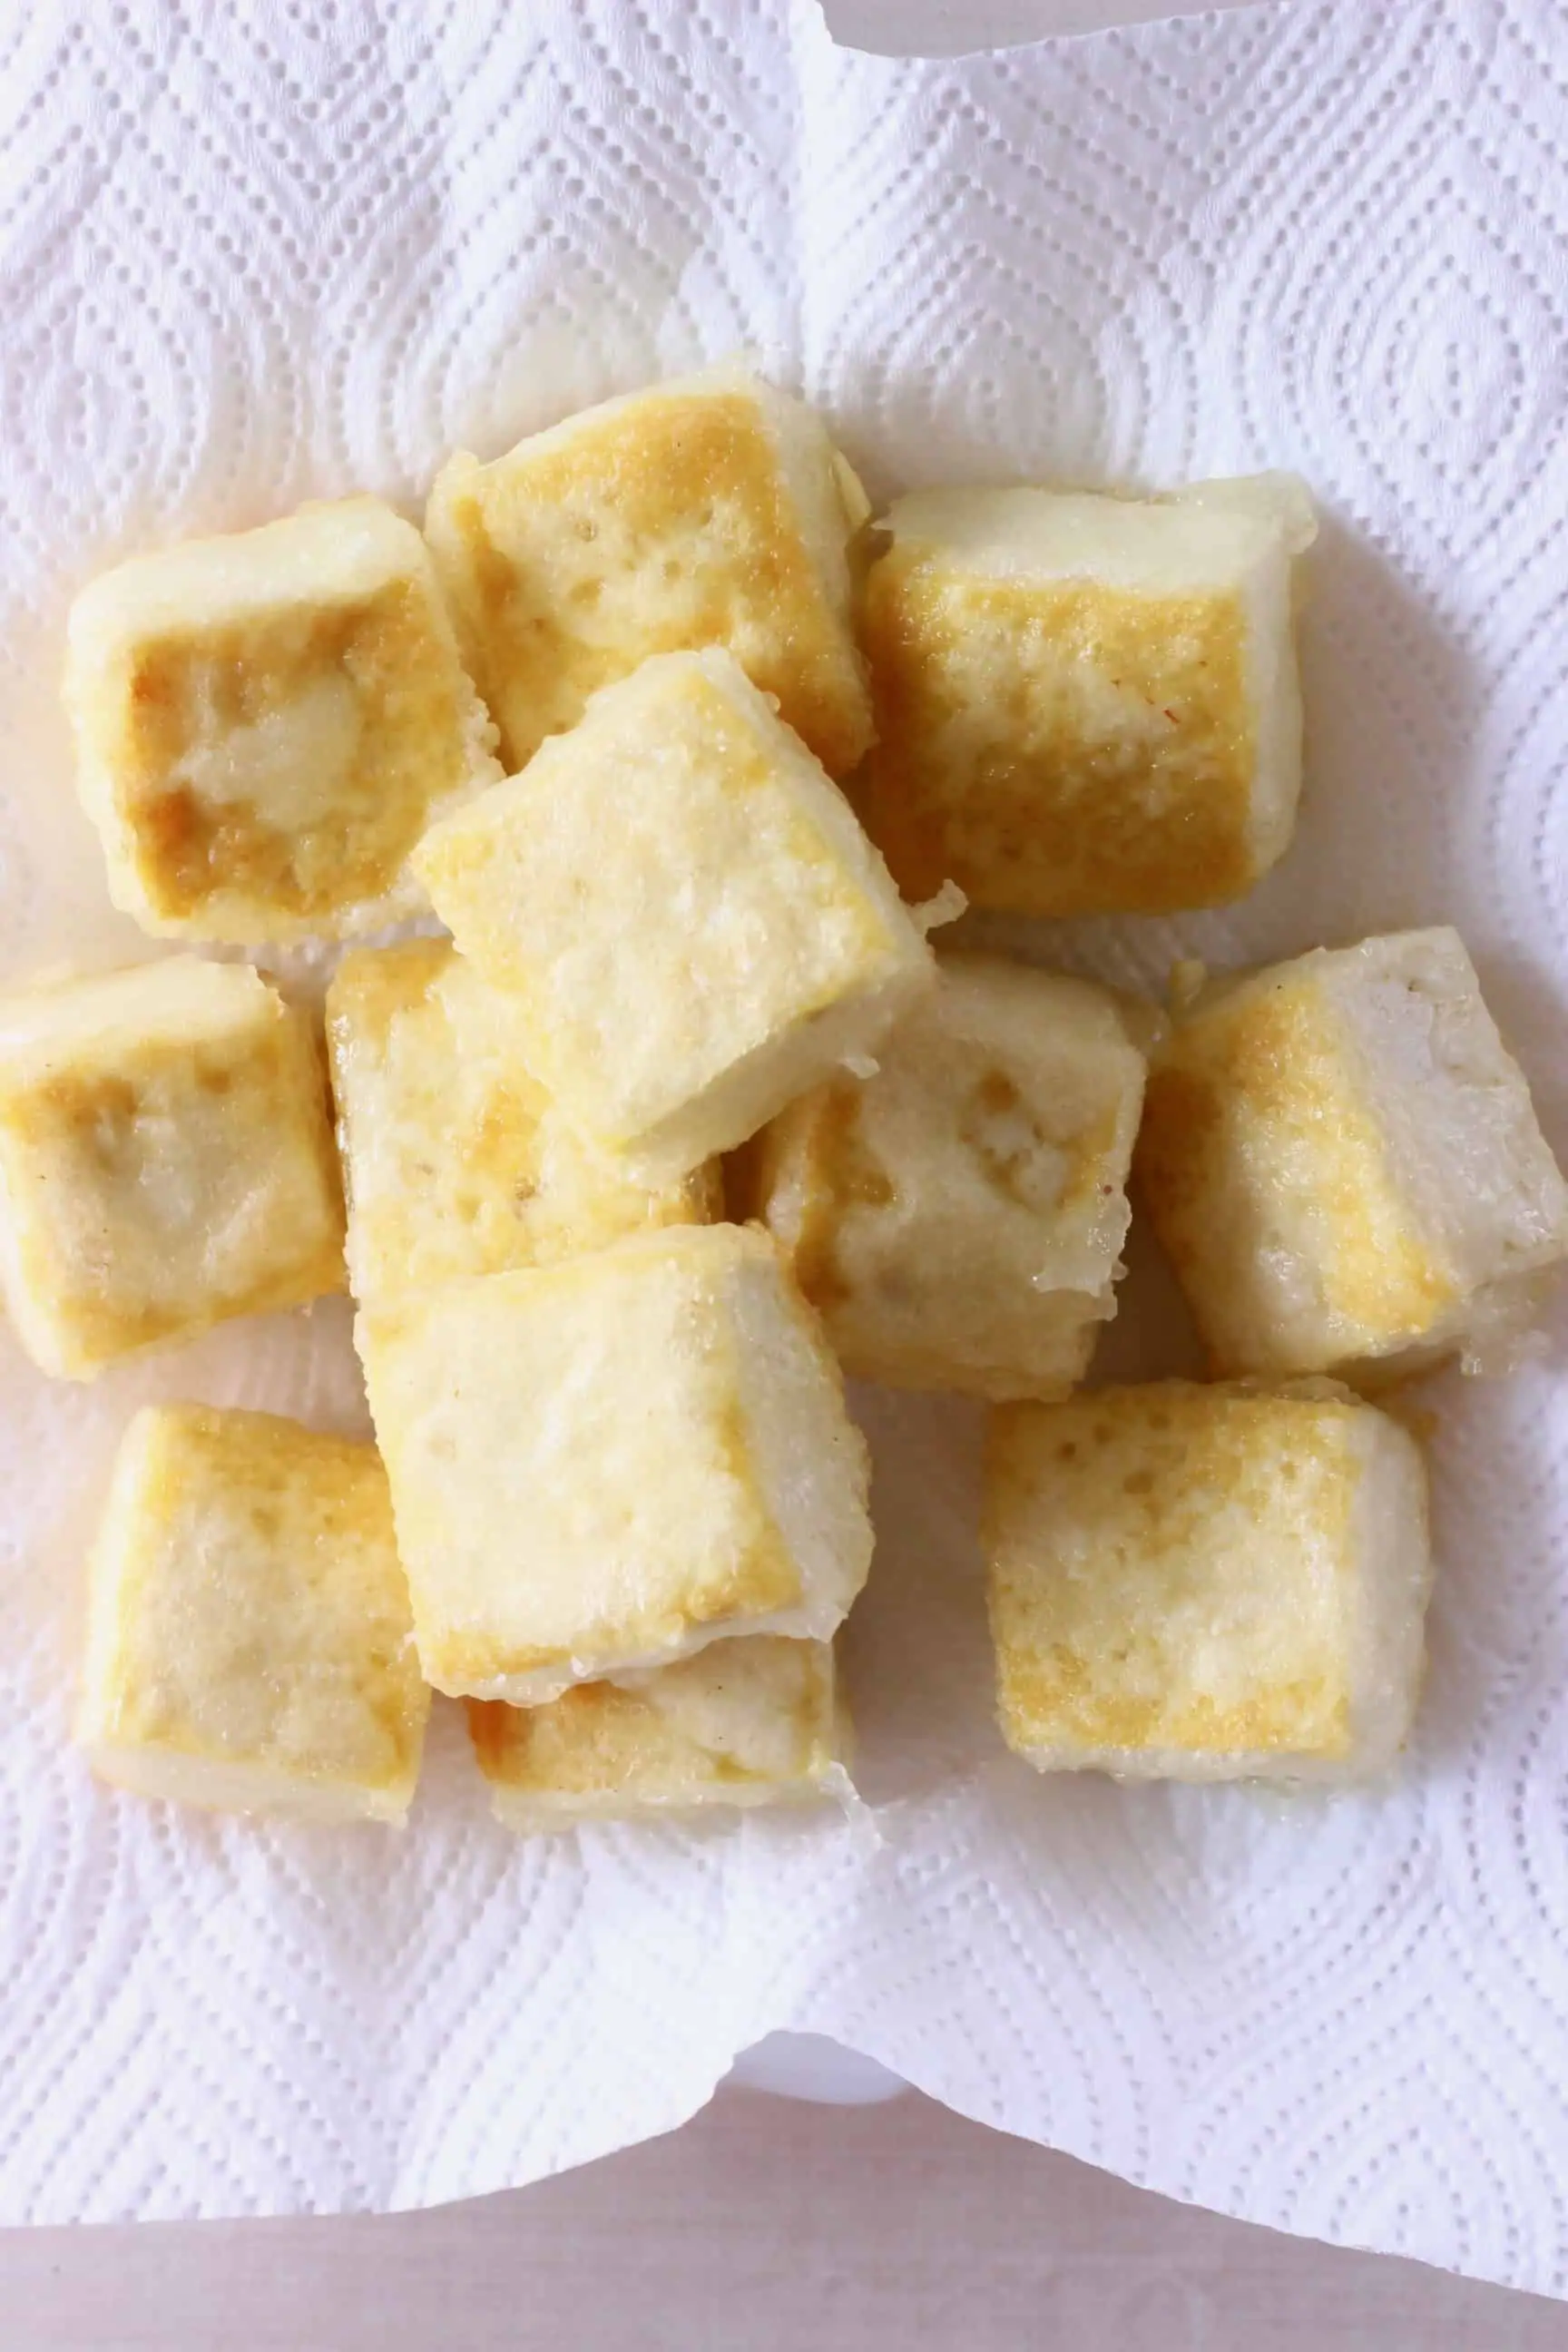 Golden brown cubes of batter-coated tofu on a piece of kitchen paper on a plate